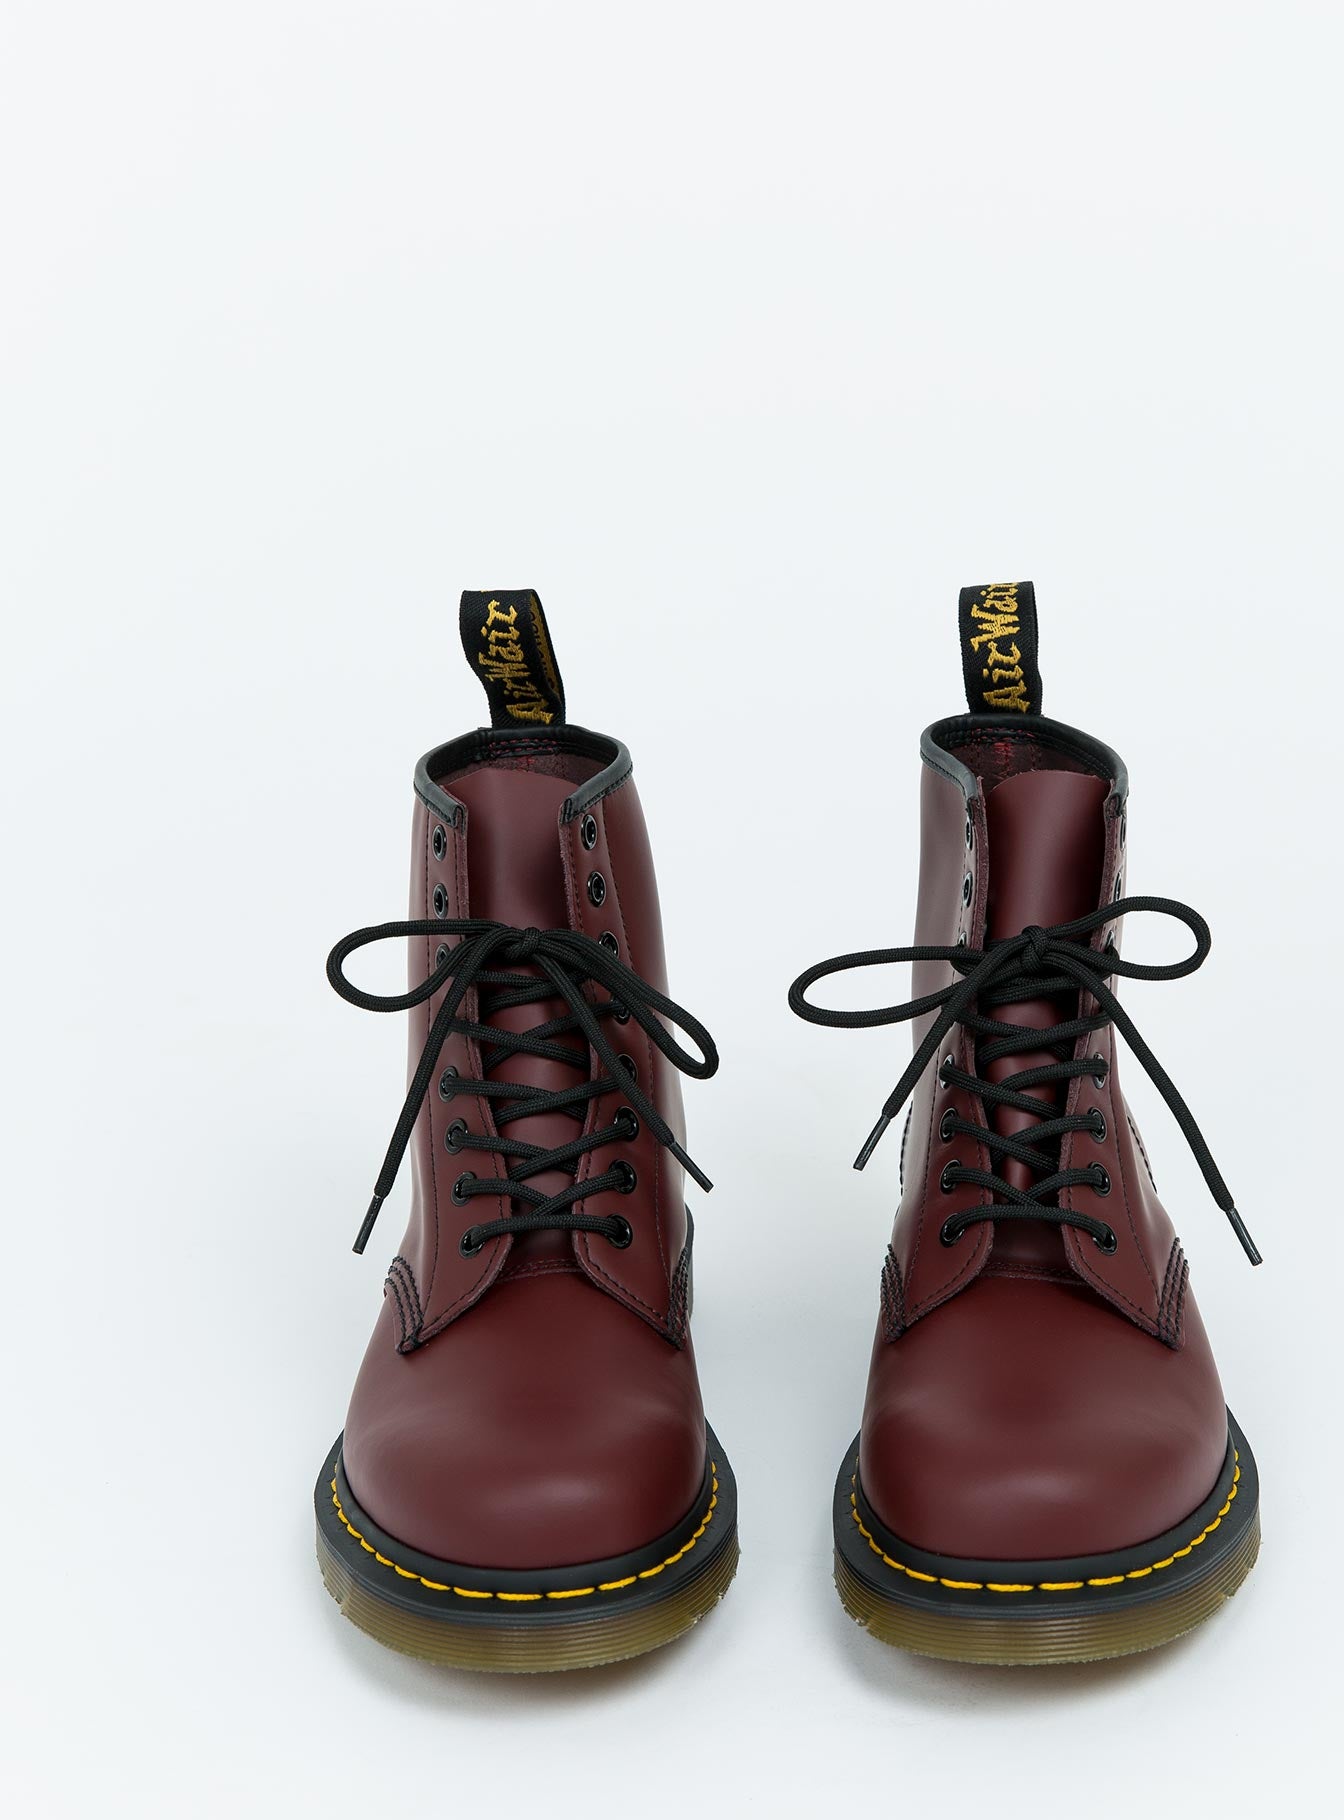 Dr. Martens 1460 Cherry Boots - LIMITED 